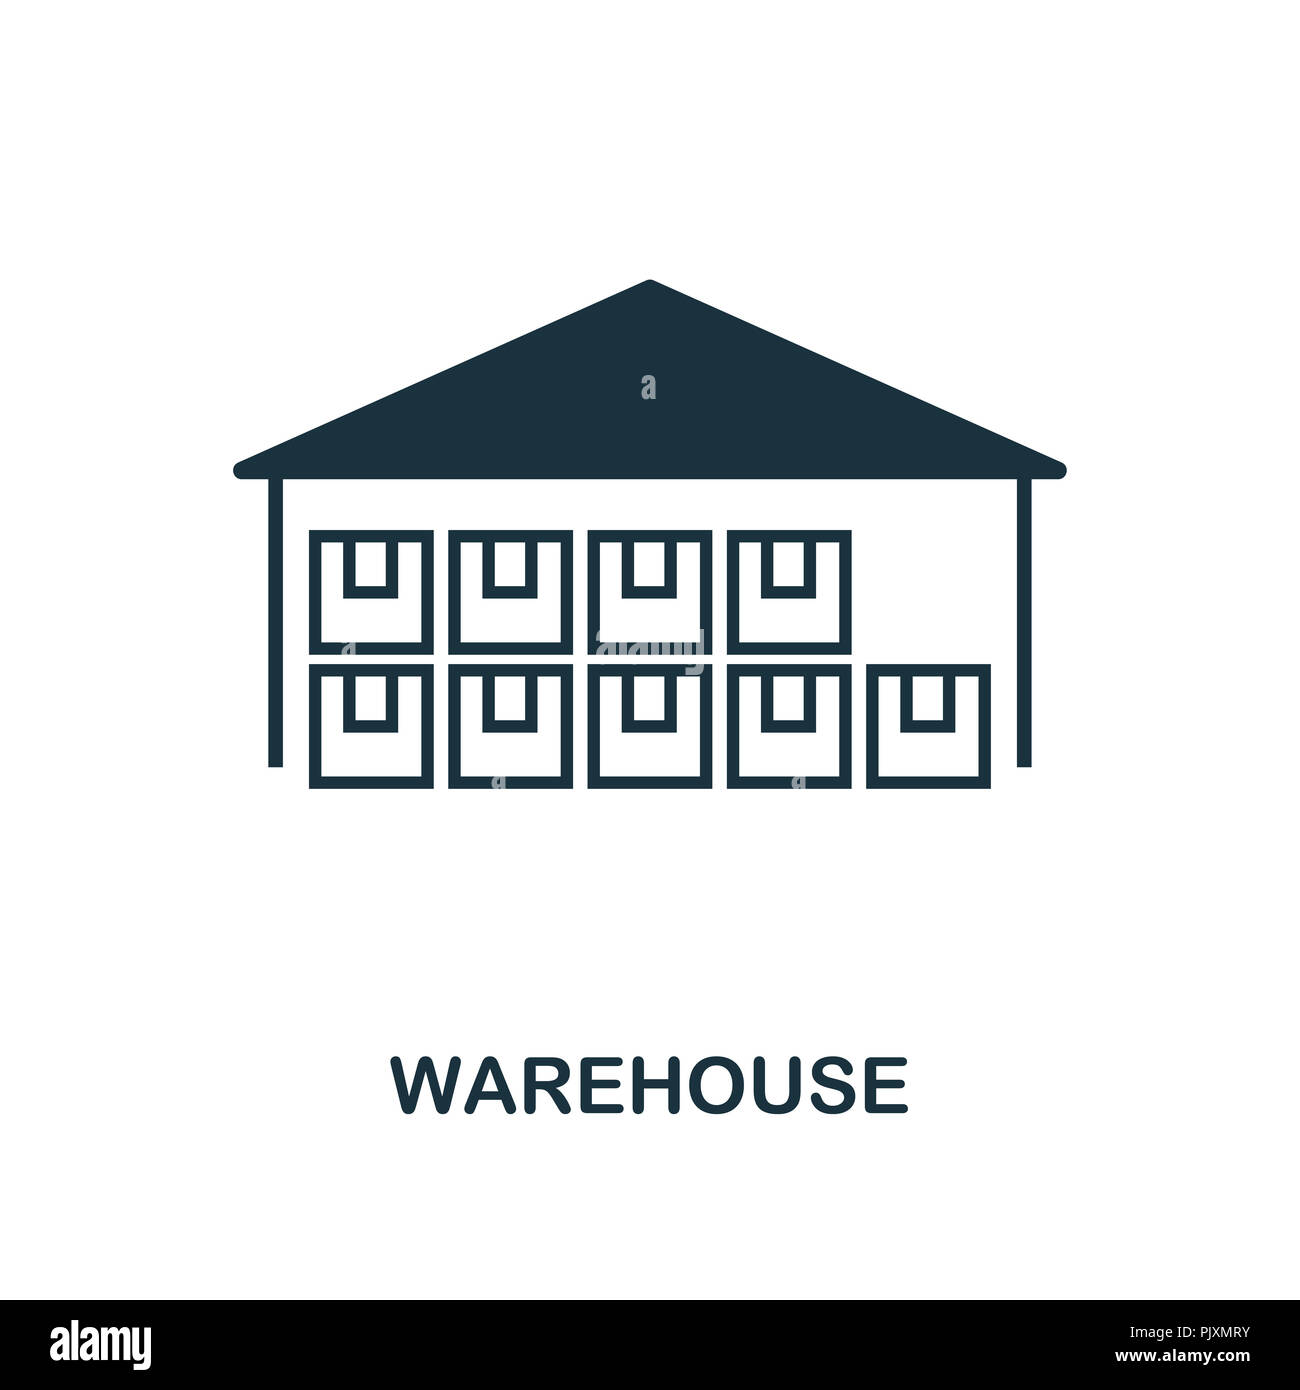 Warehouse Icon Monochrome Style Design From Logistics Delivery Collection Ui Pixel Perfect Simple Pictogram Warehouse Icon Web Design Apps Softw Stock Photo Alamy